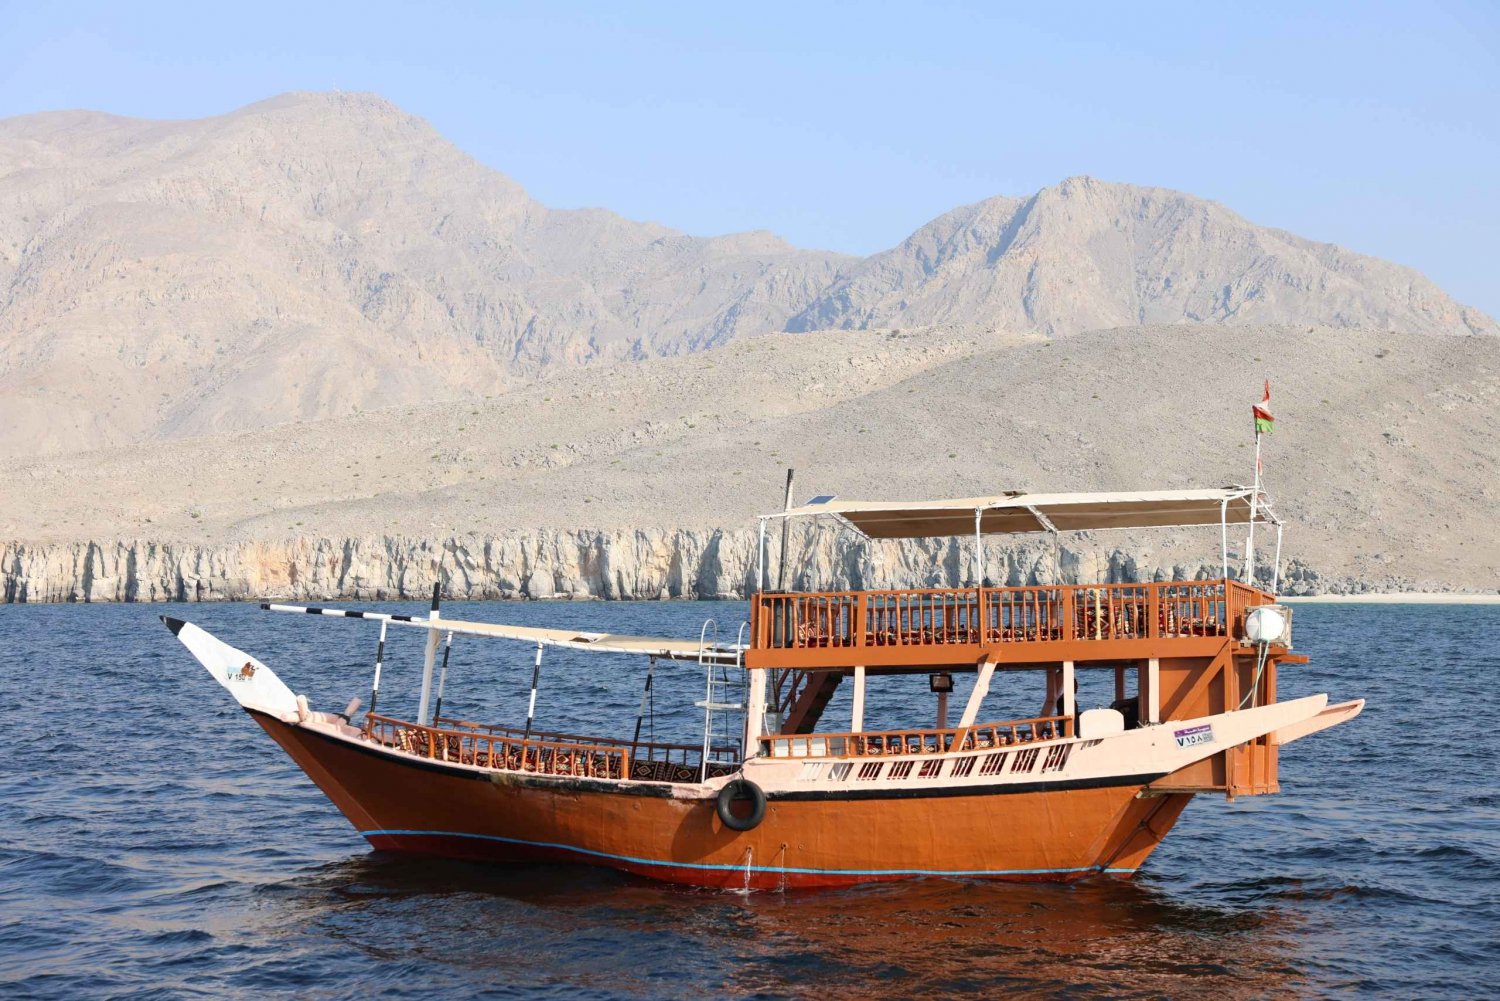 Khasab: Full Day Dhow Cruise to Watch Dolphins With Lunch